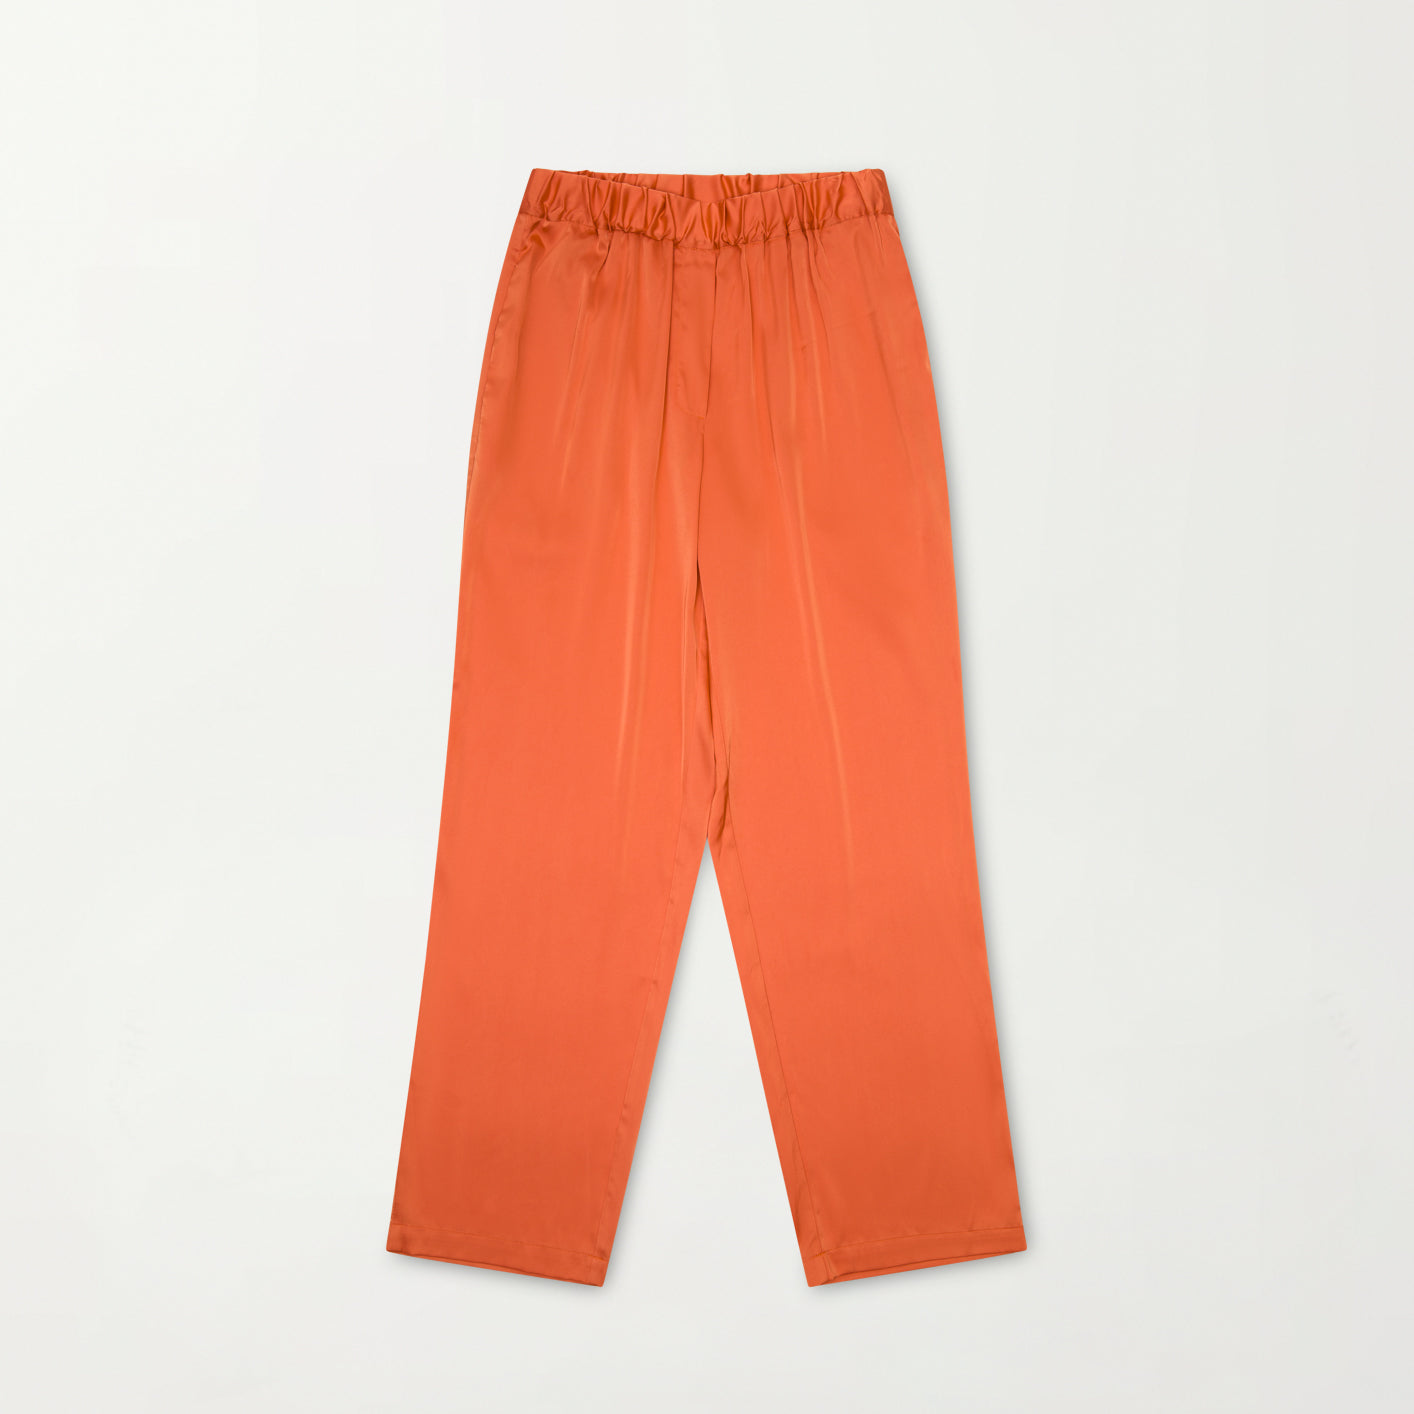 The Jet Set Pant in Apricot